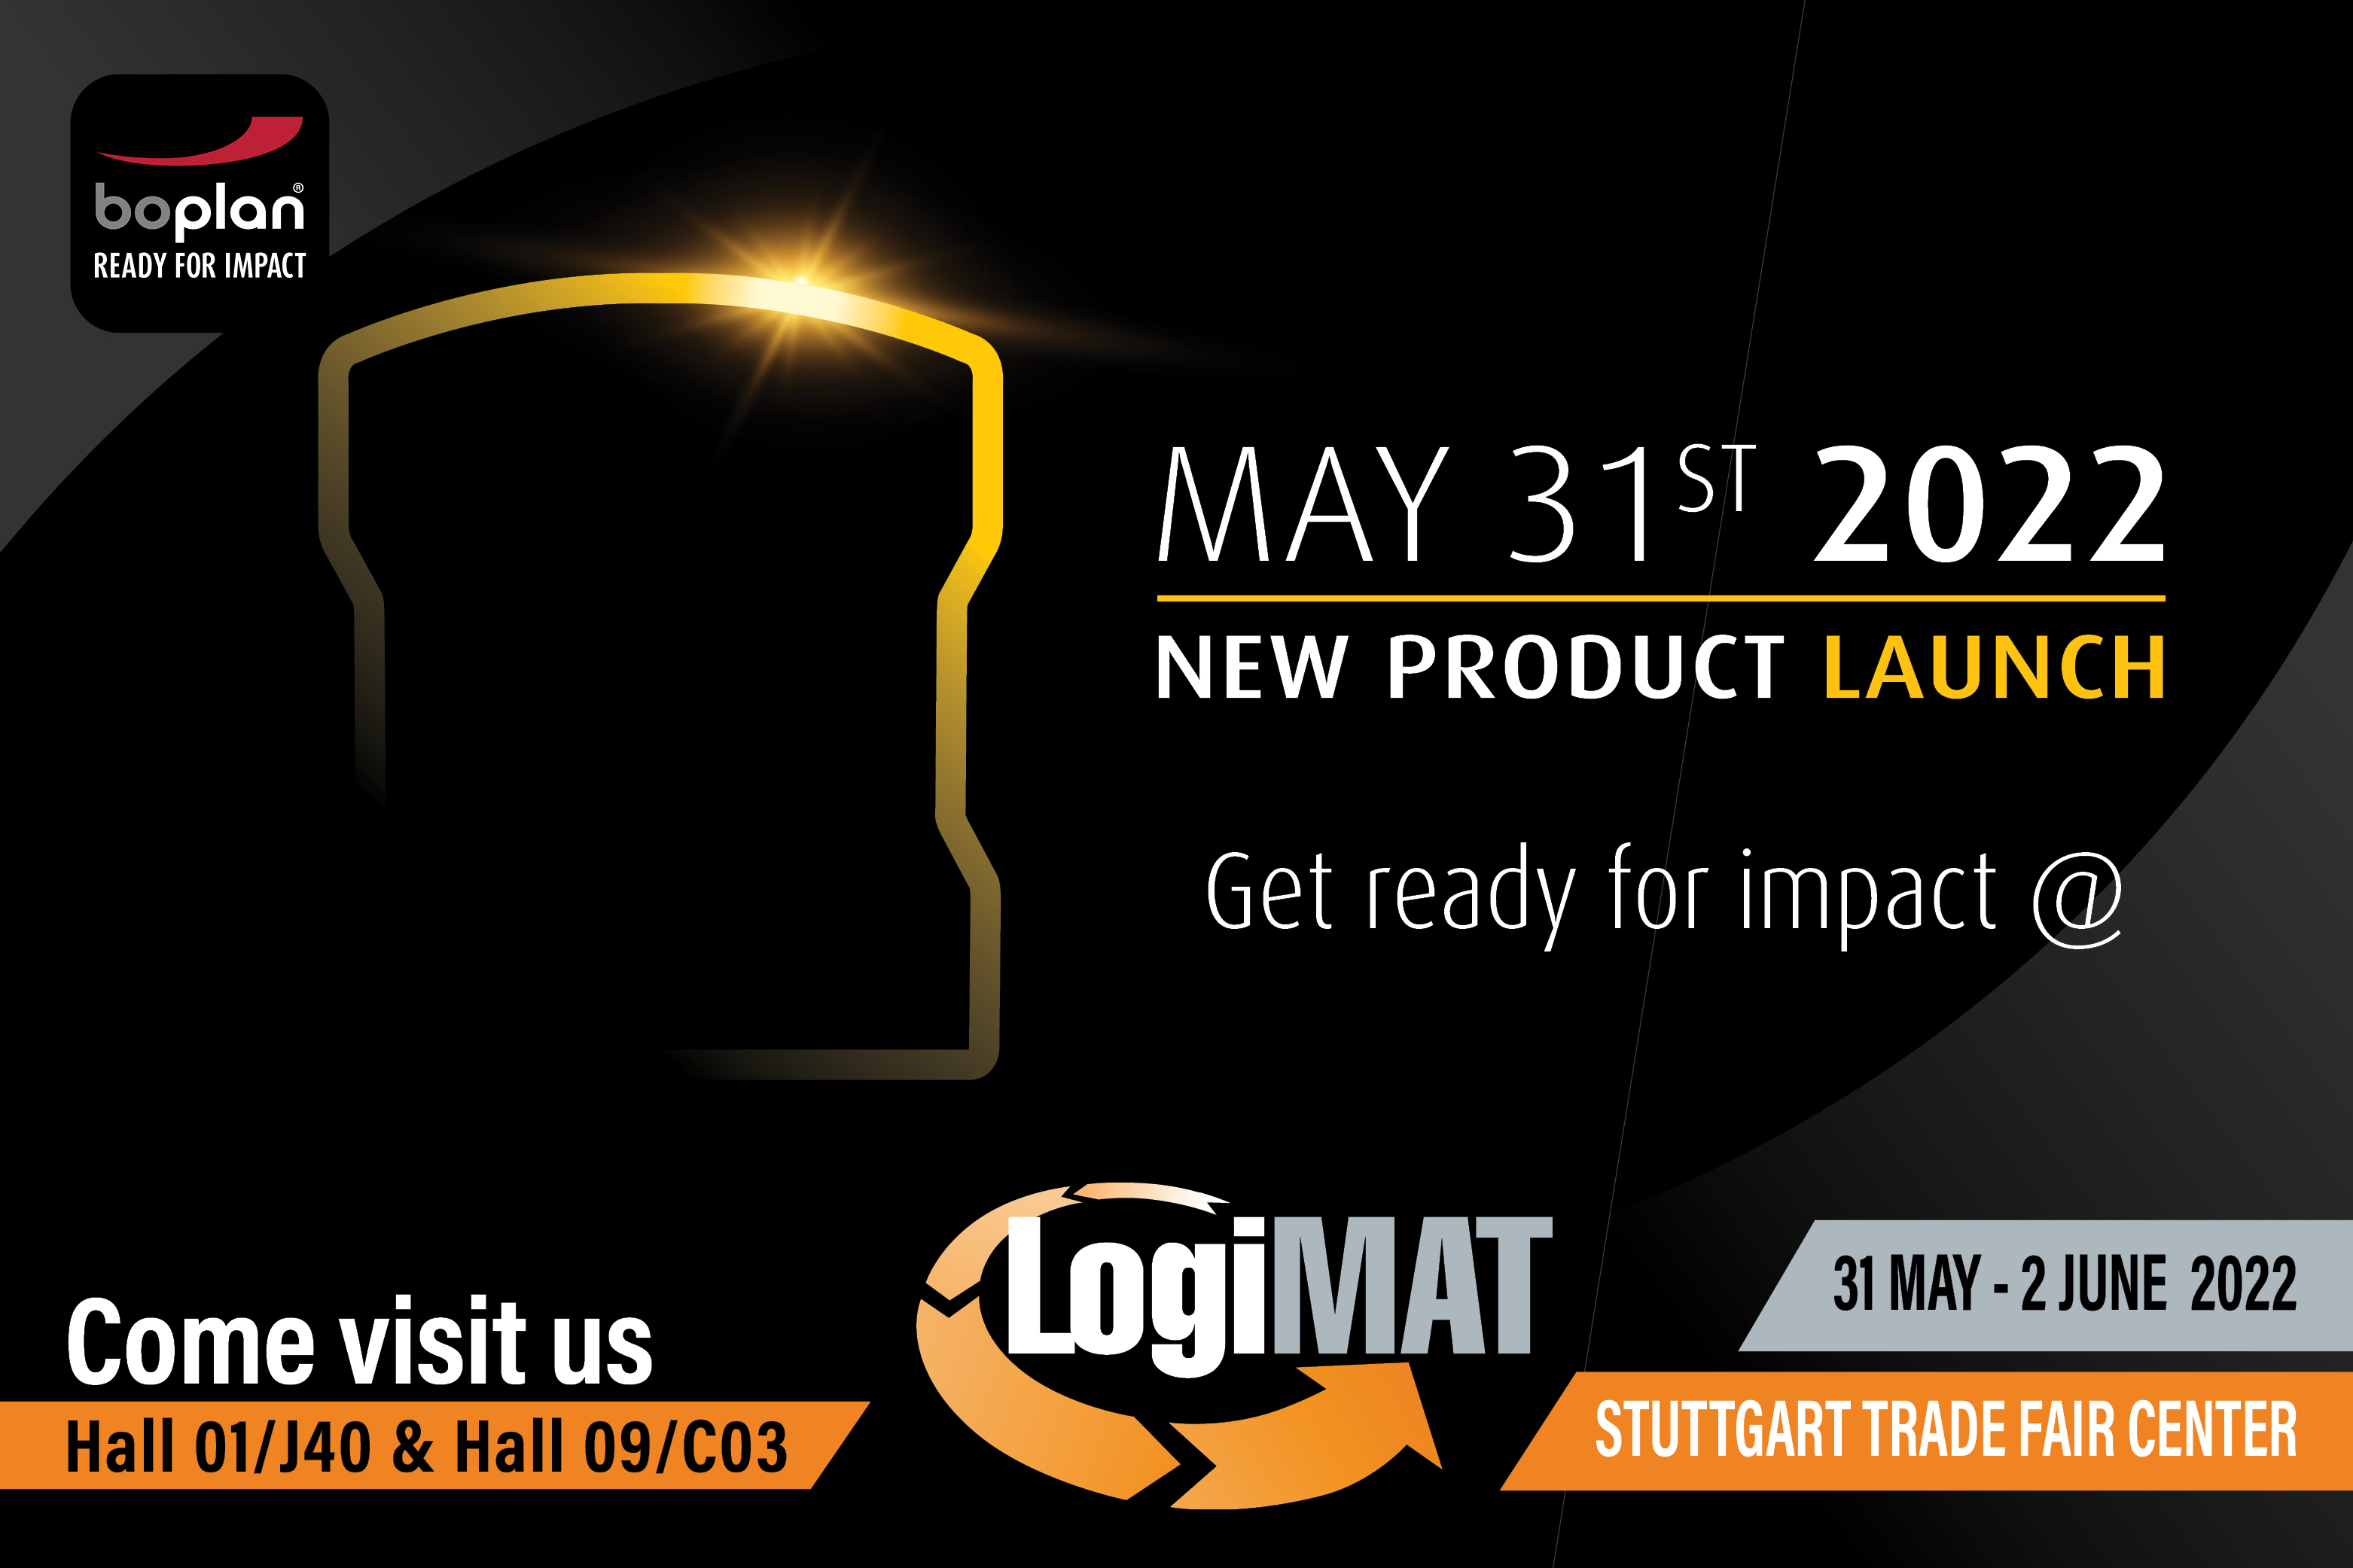 Discover the new BOPLAN safety products at LogiMAT 2022